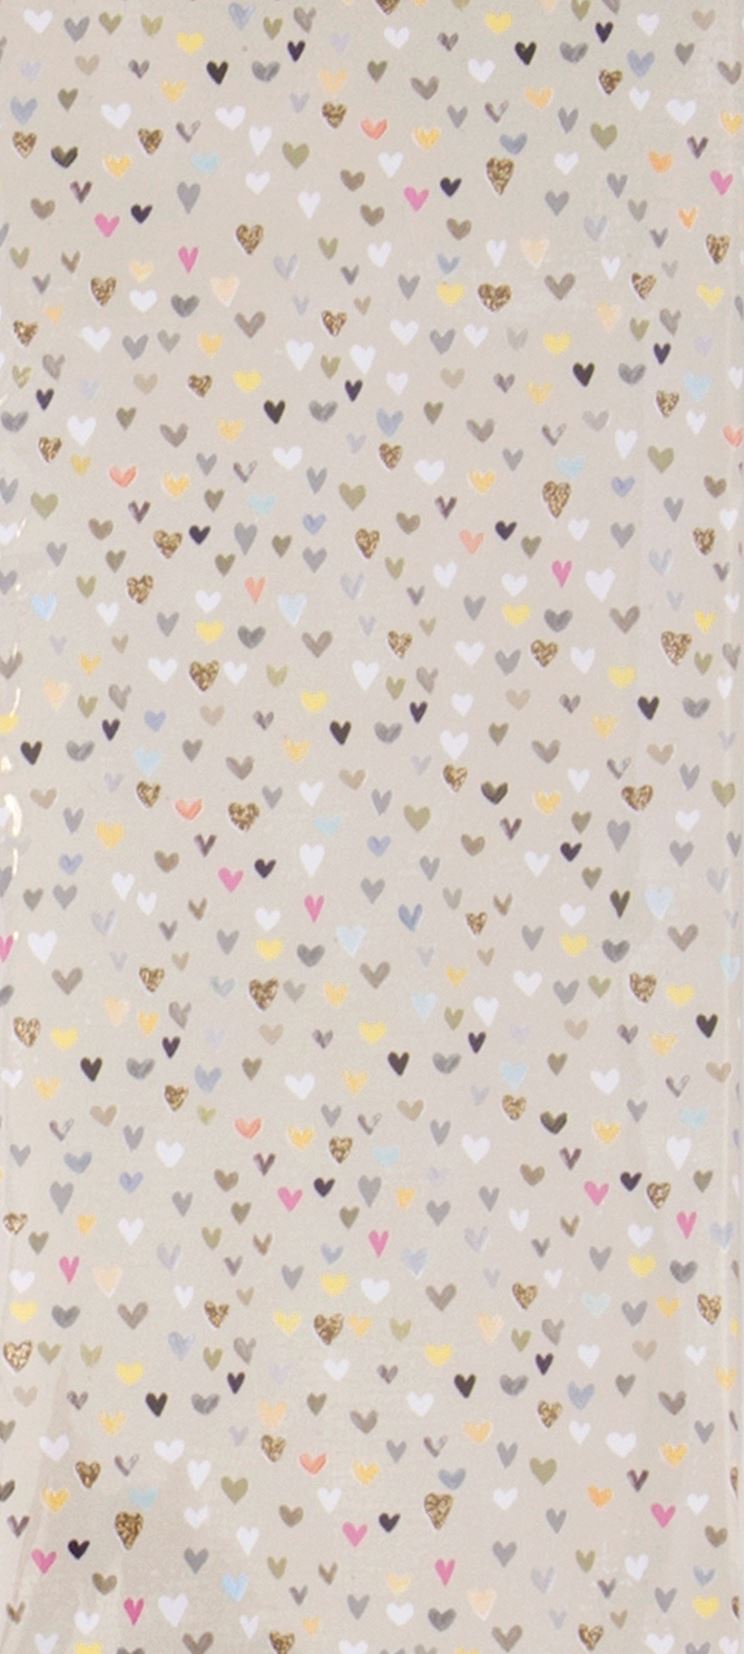 A rectangular sheet of tissue paper with a matt gold/beige background covered in tiny hearts of differing colours and textures. The hearts are pink, gold, black, white and silver. The hearts are not uniform in shape or placement.